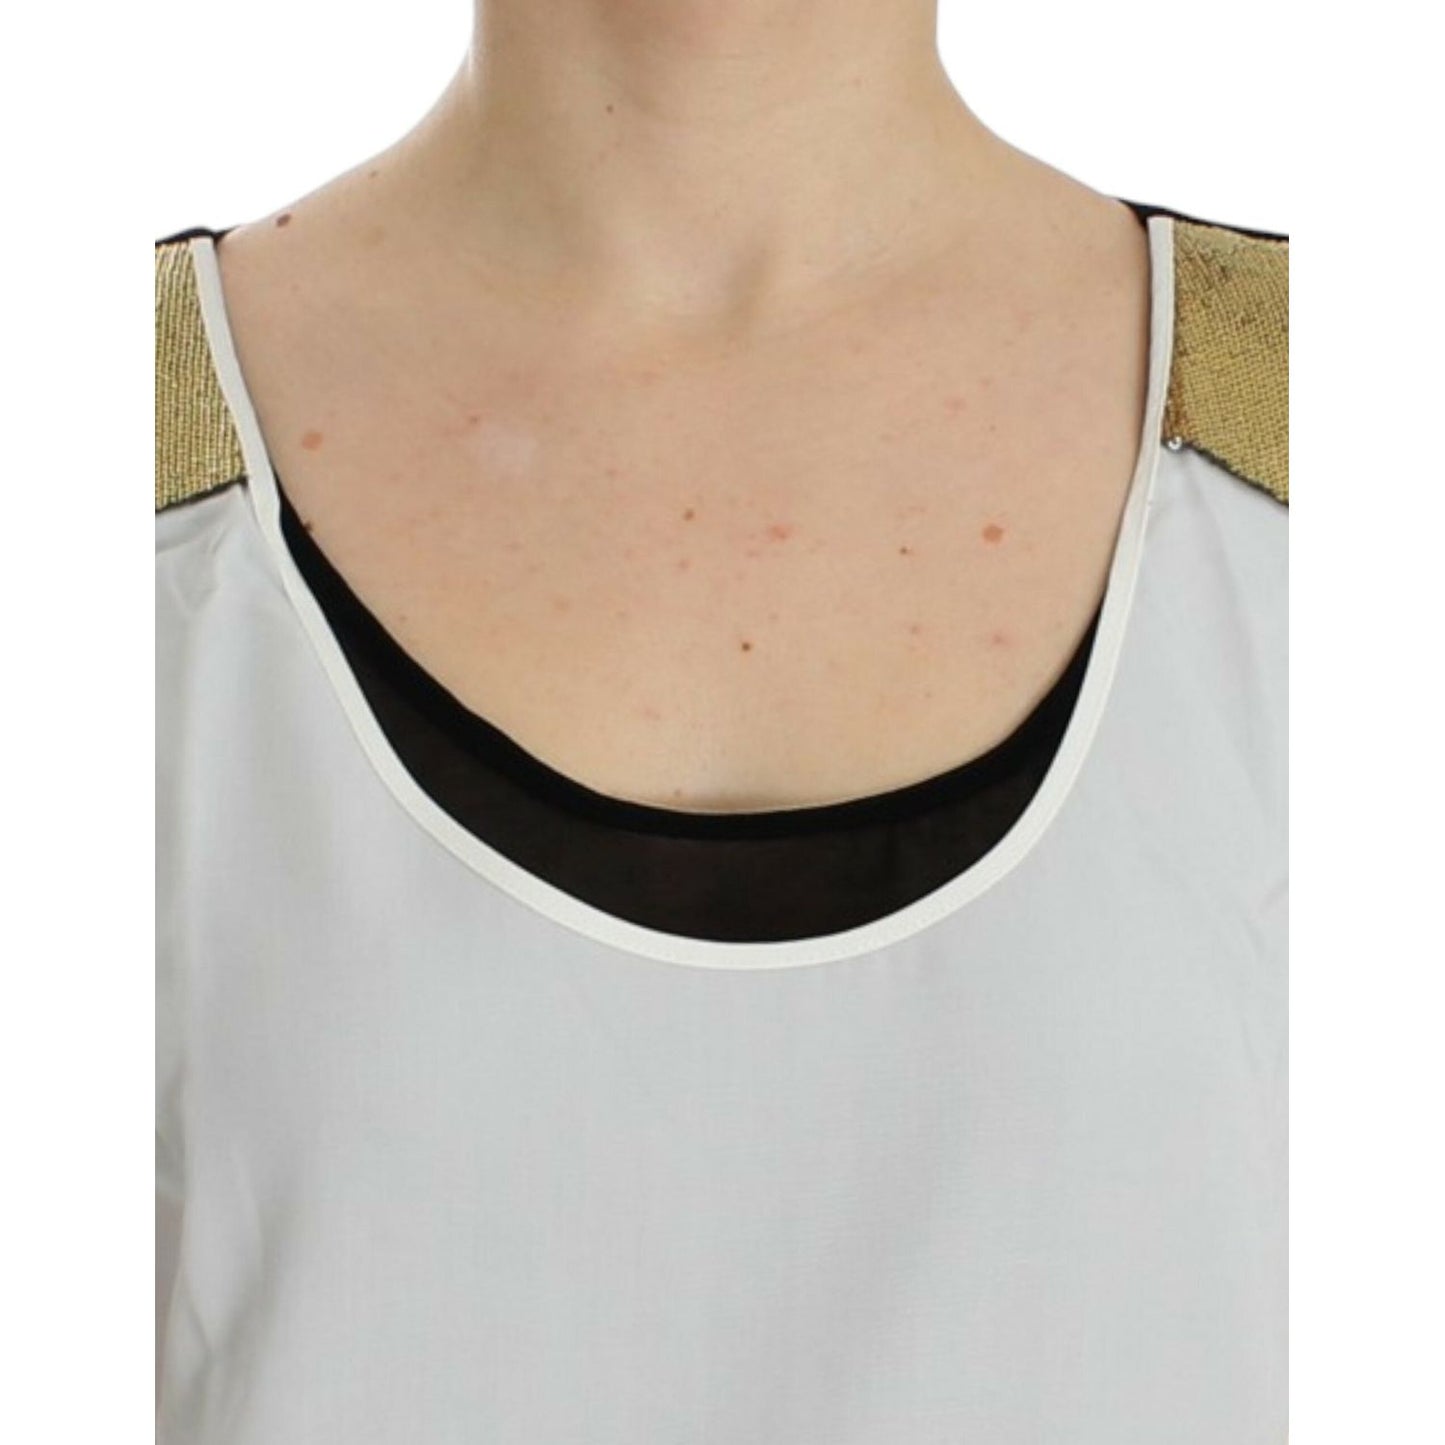 Costume National Elegant Monochrome Sleeveless Top with Gold Accents white-sleeveless-top